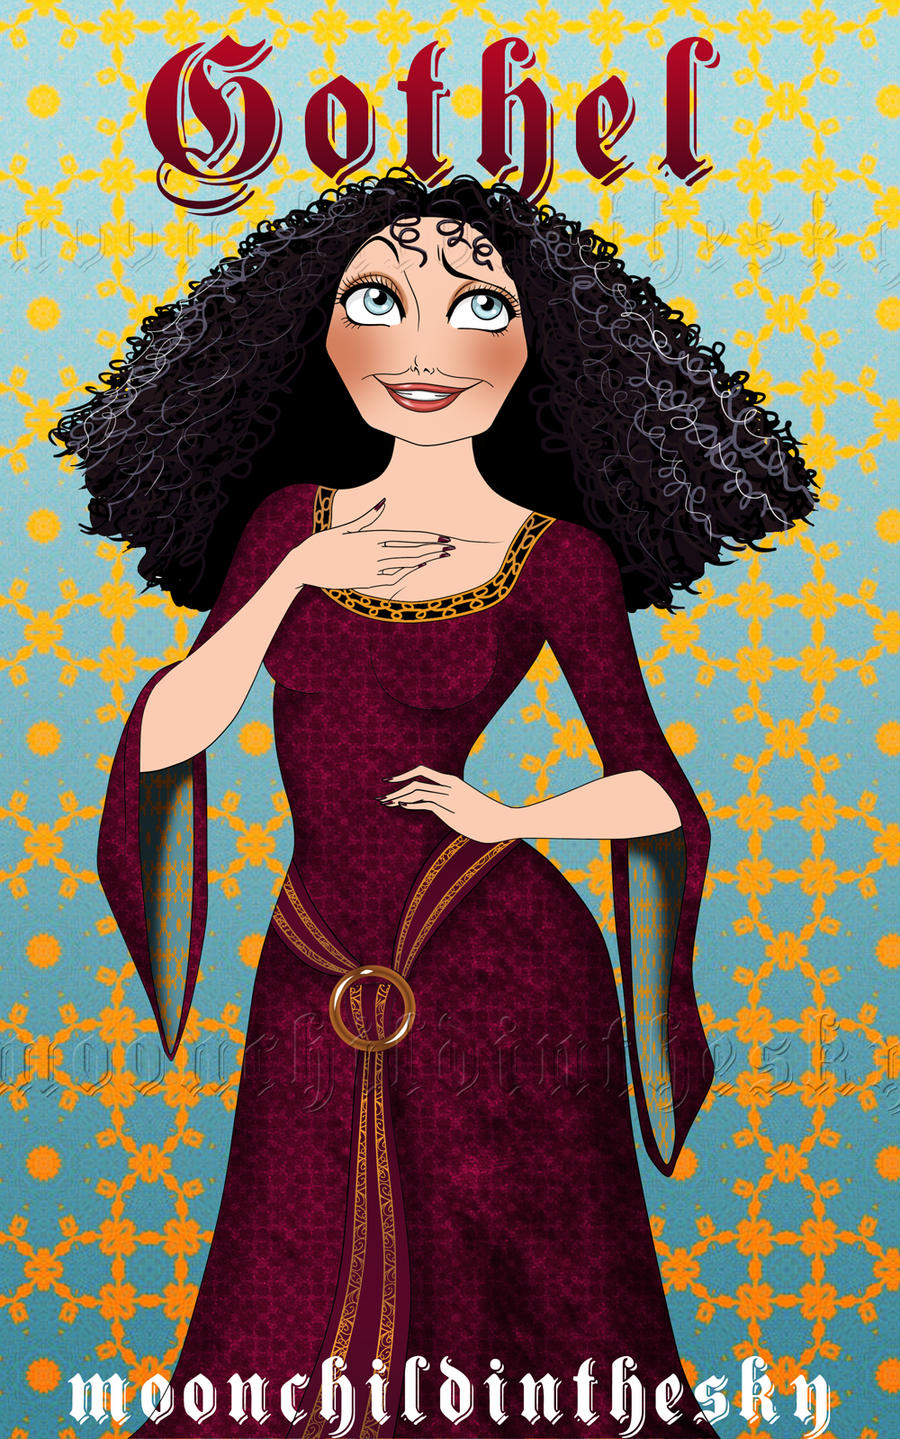 mother gothel clipart - photo #42